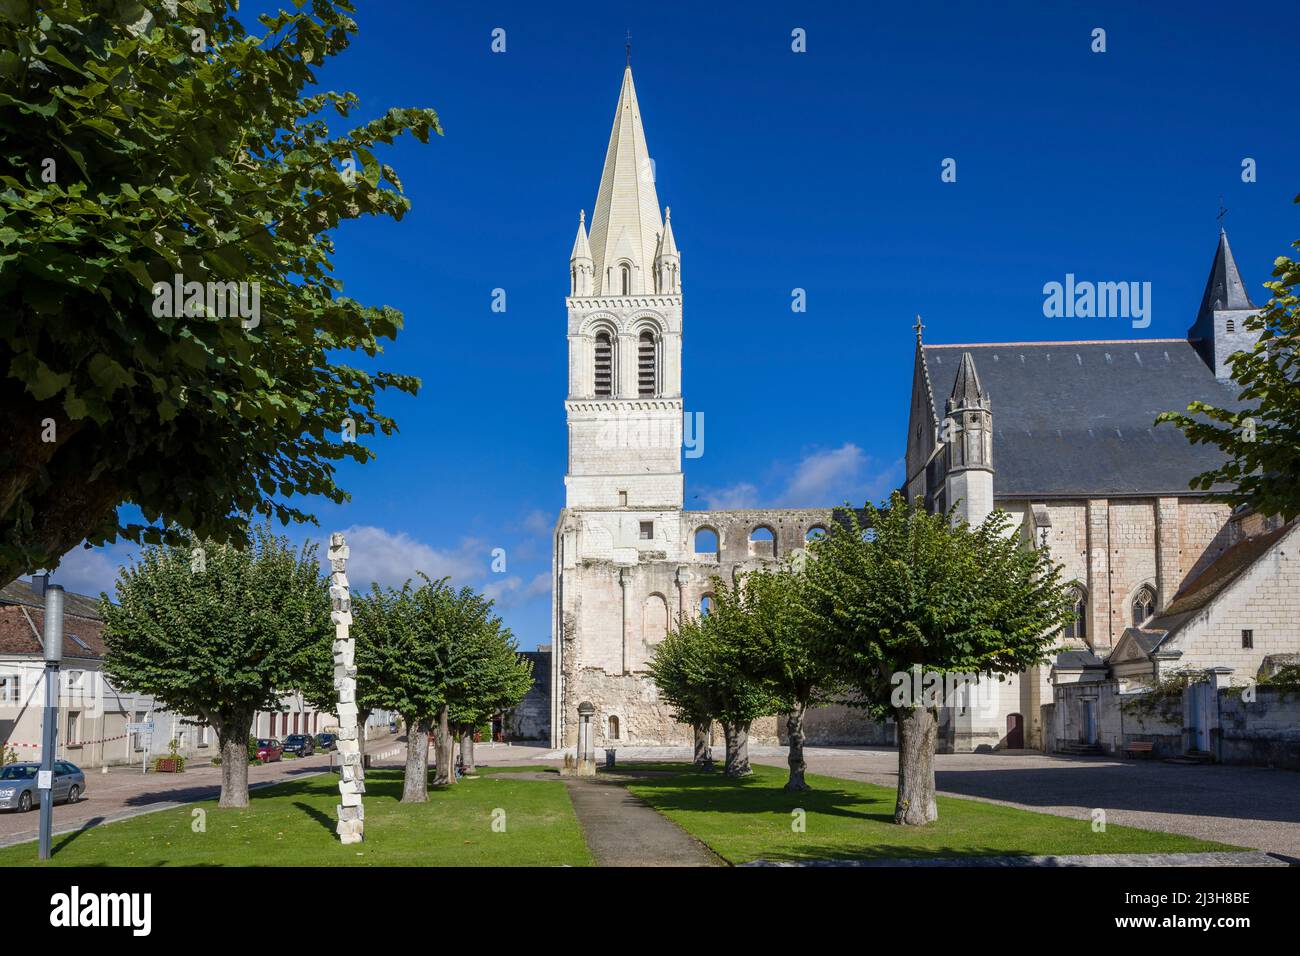 France, Indre et Loire, Loire valley listed as World Heritage by UNESCO, Beaulieu-les-Loches, the spire of the Grand Clocher of the abbey church, which is over 1000 years old, rises to 64 meters and was completely rebuilt in 2016-2017 Stock Photo